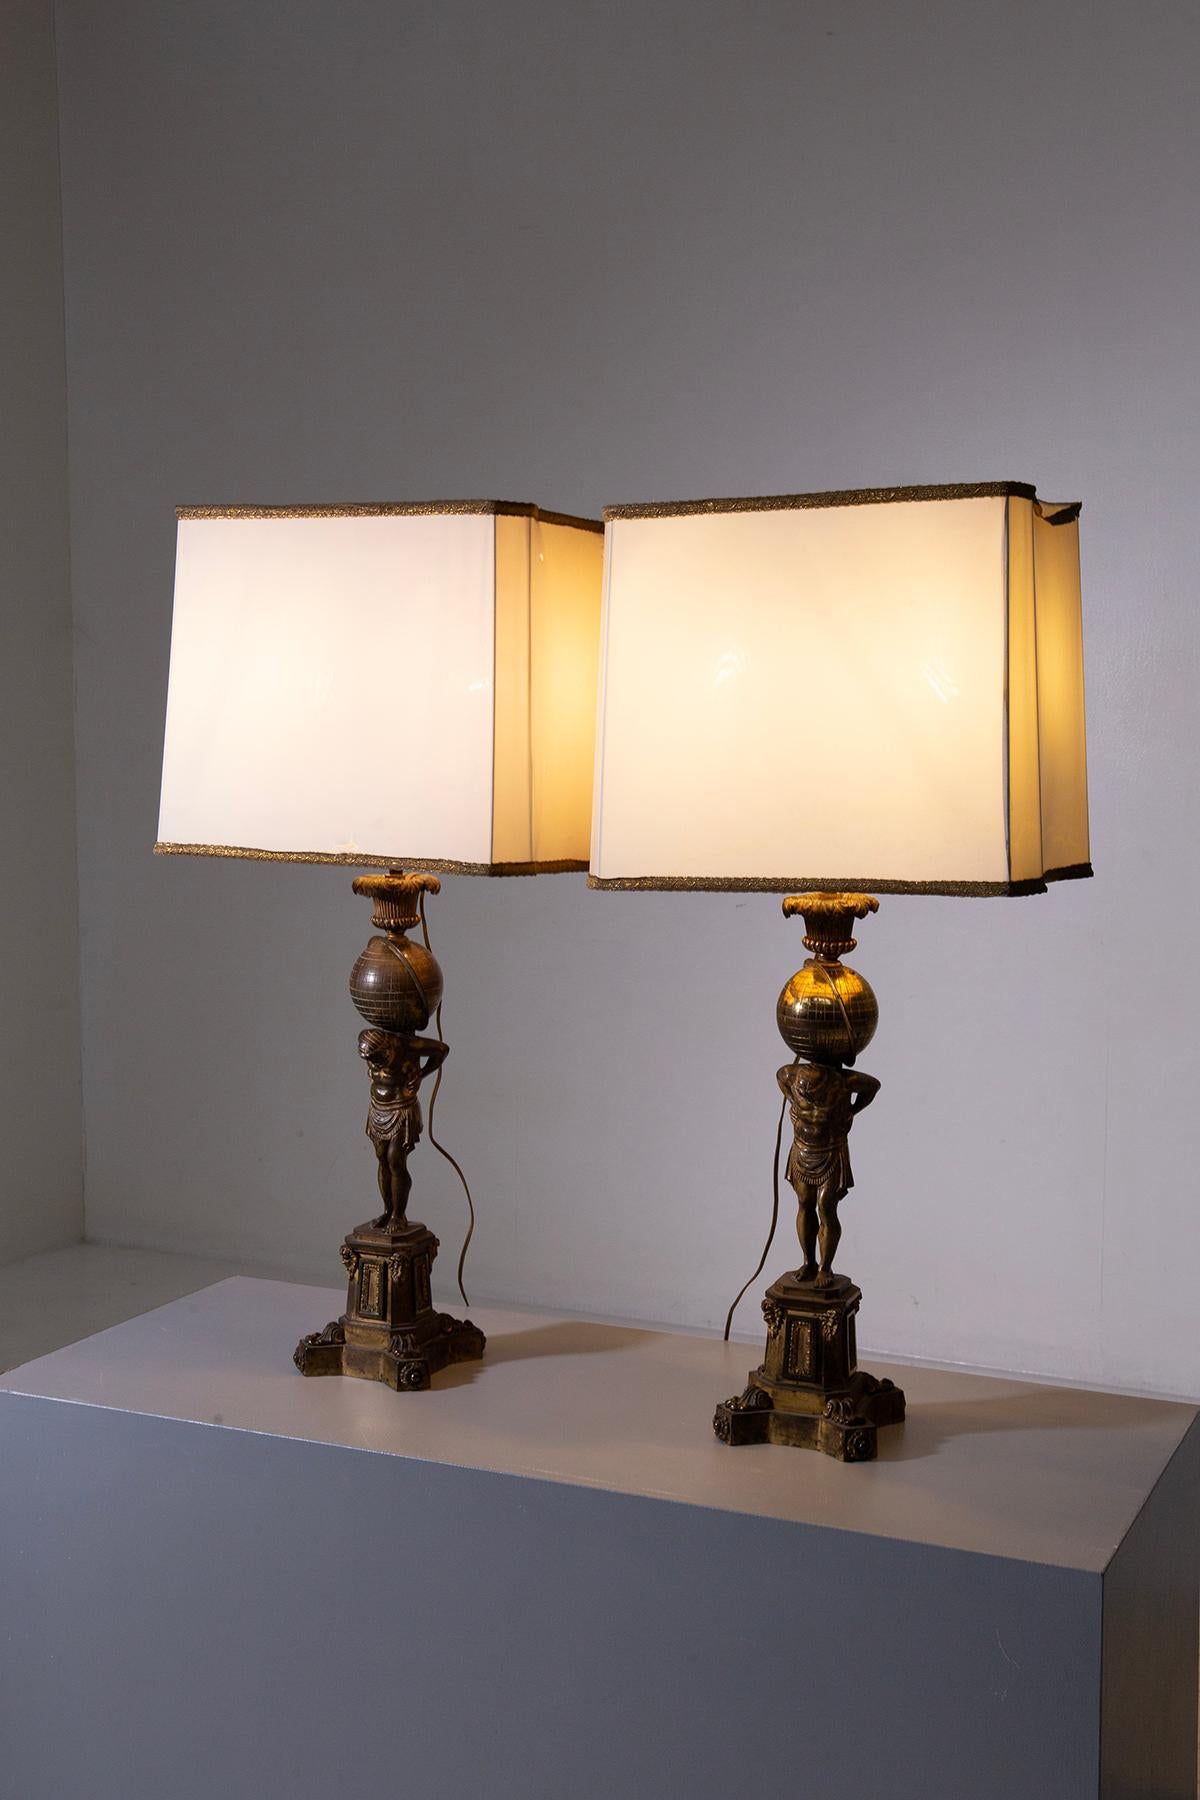 This exquisite pair of table lamps, originally candelabra from the late 1700s, carries the timeless elegance of French craftsmanship into the modern era. Now fully converted and wired anew, these lamps blend historical grandeur with contemporary